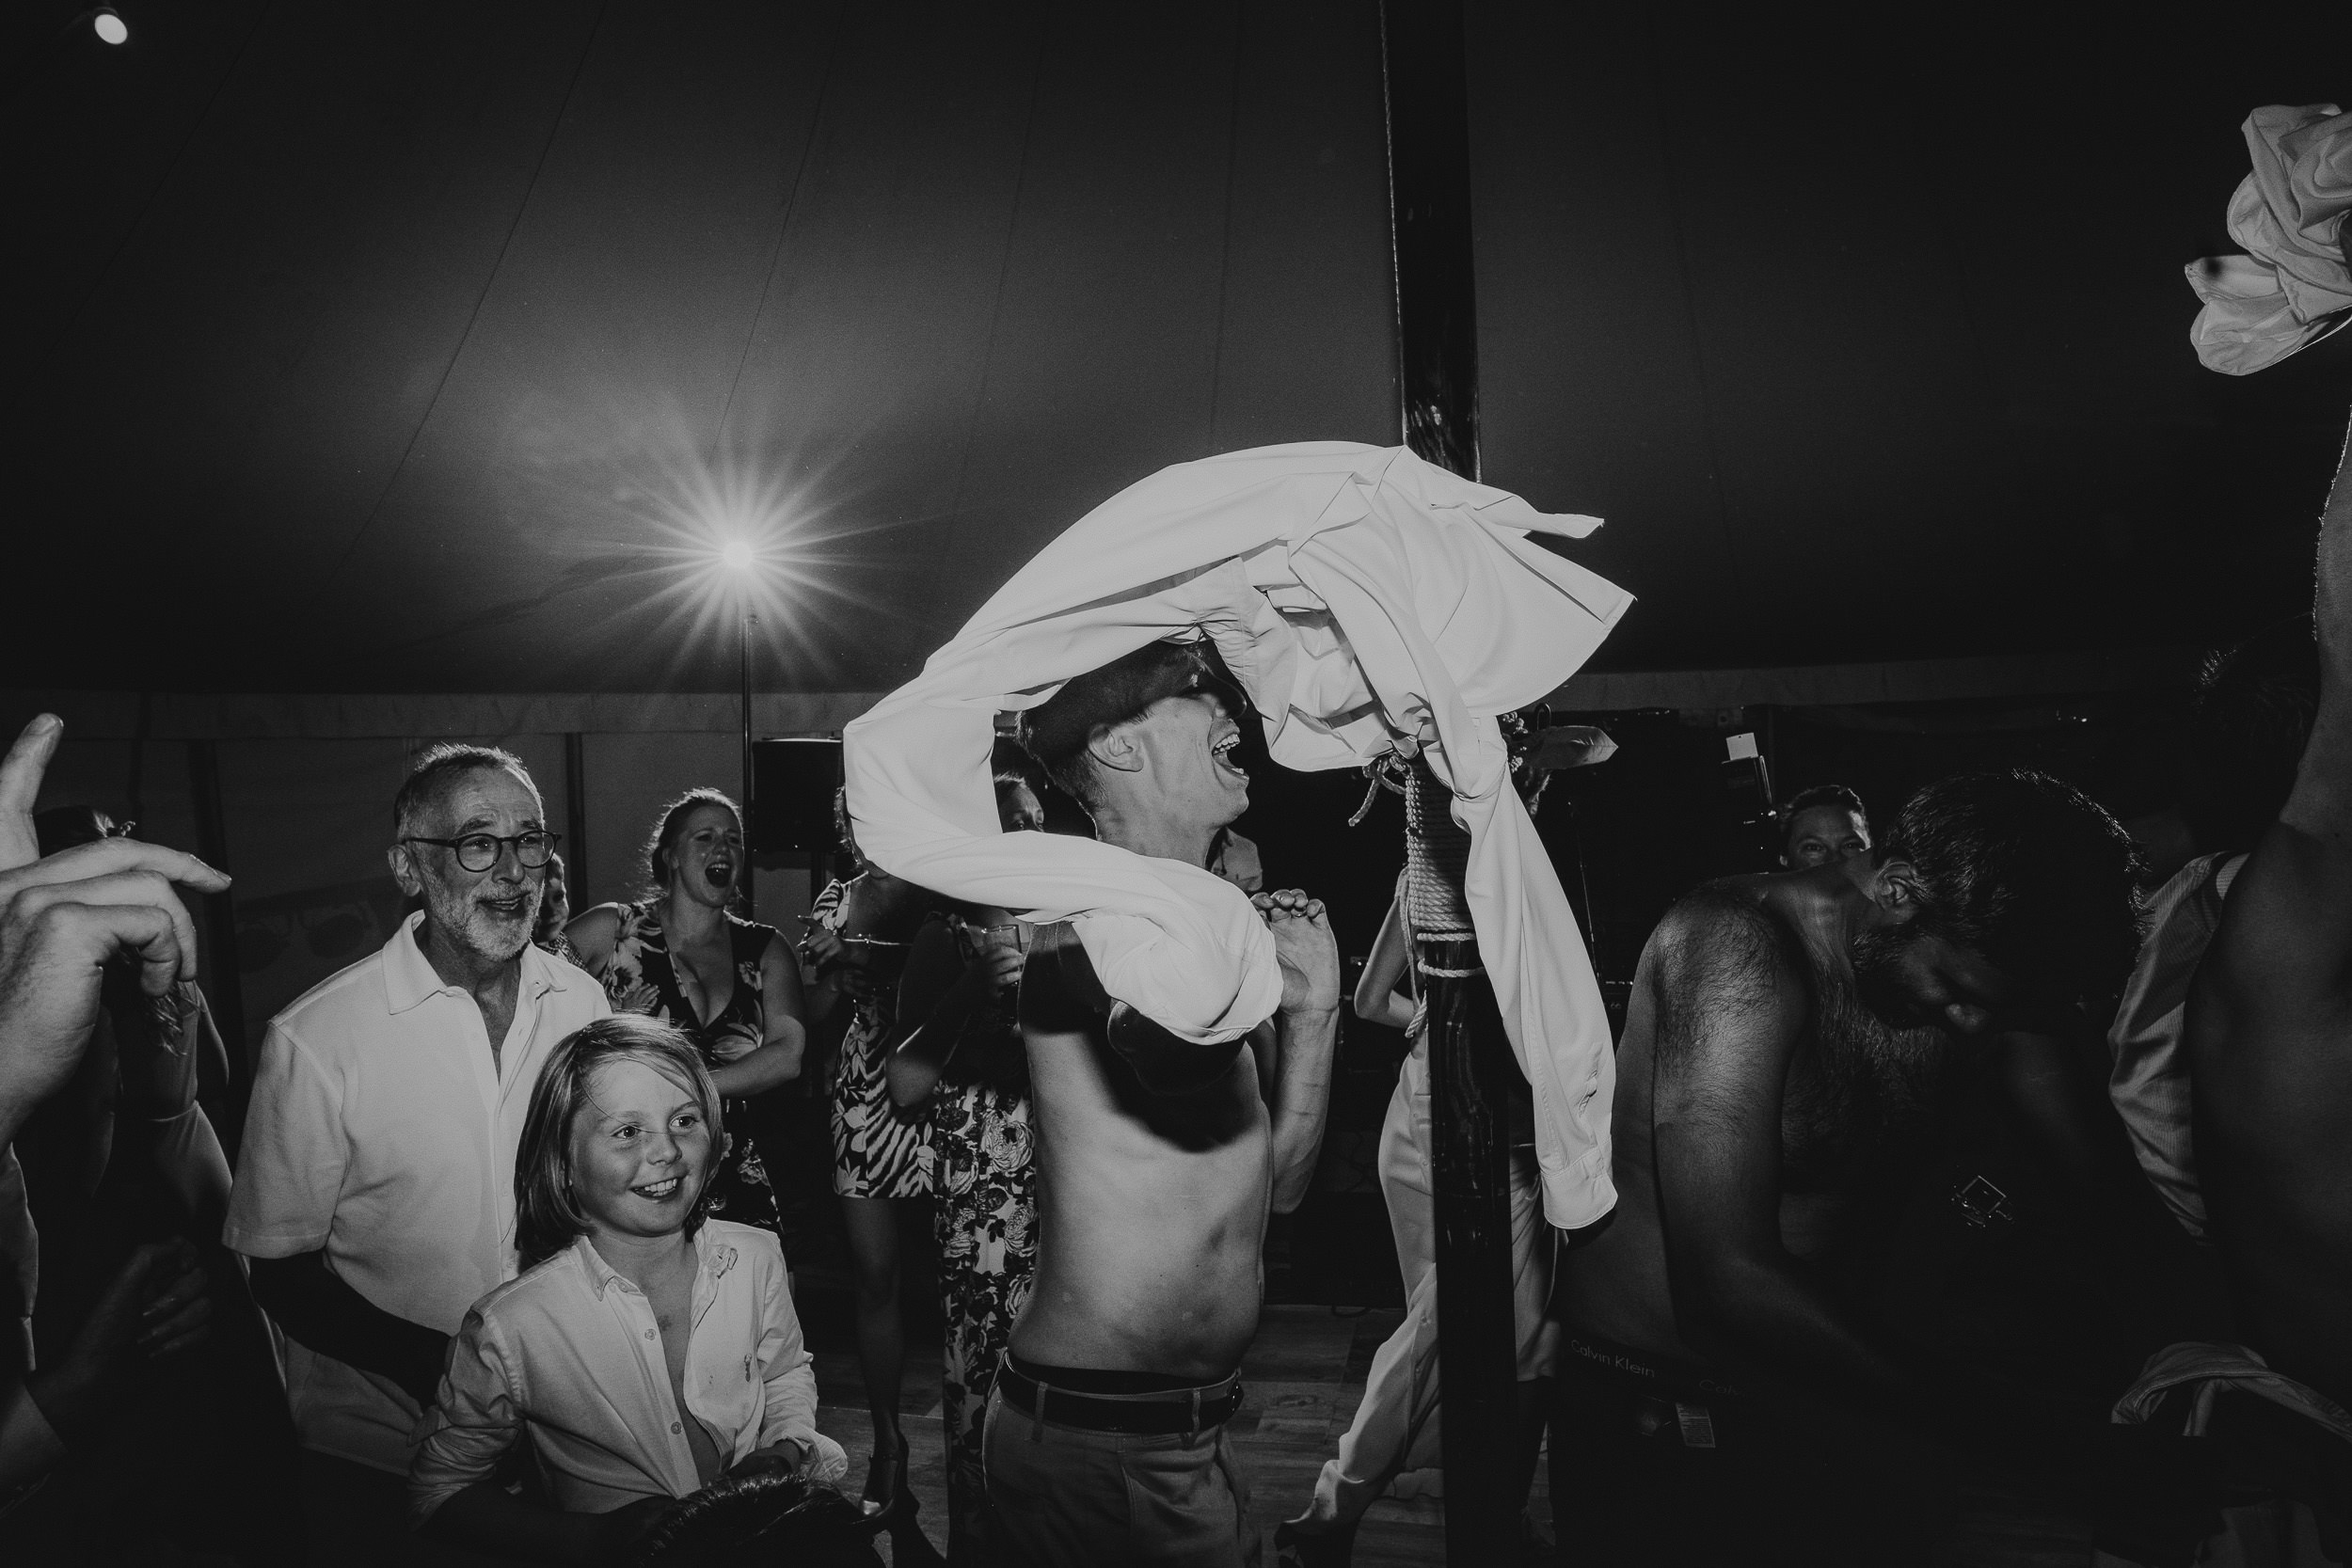 A groom is holding a towel in the air at his wedding.